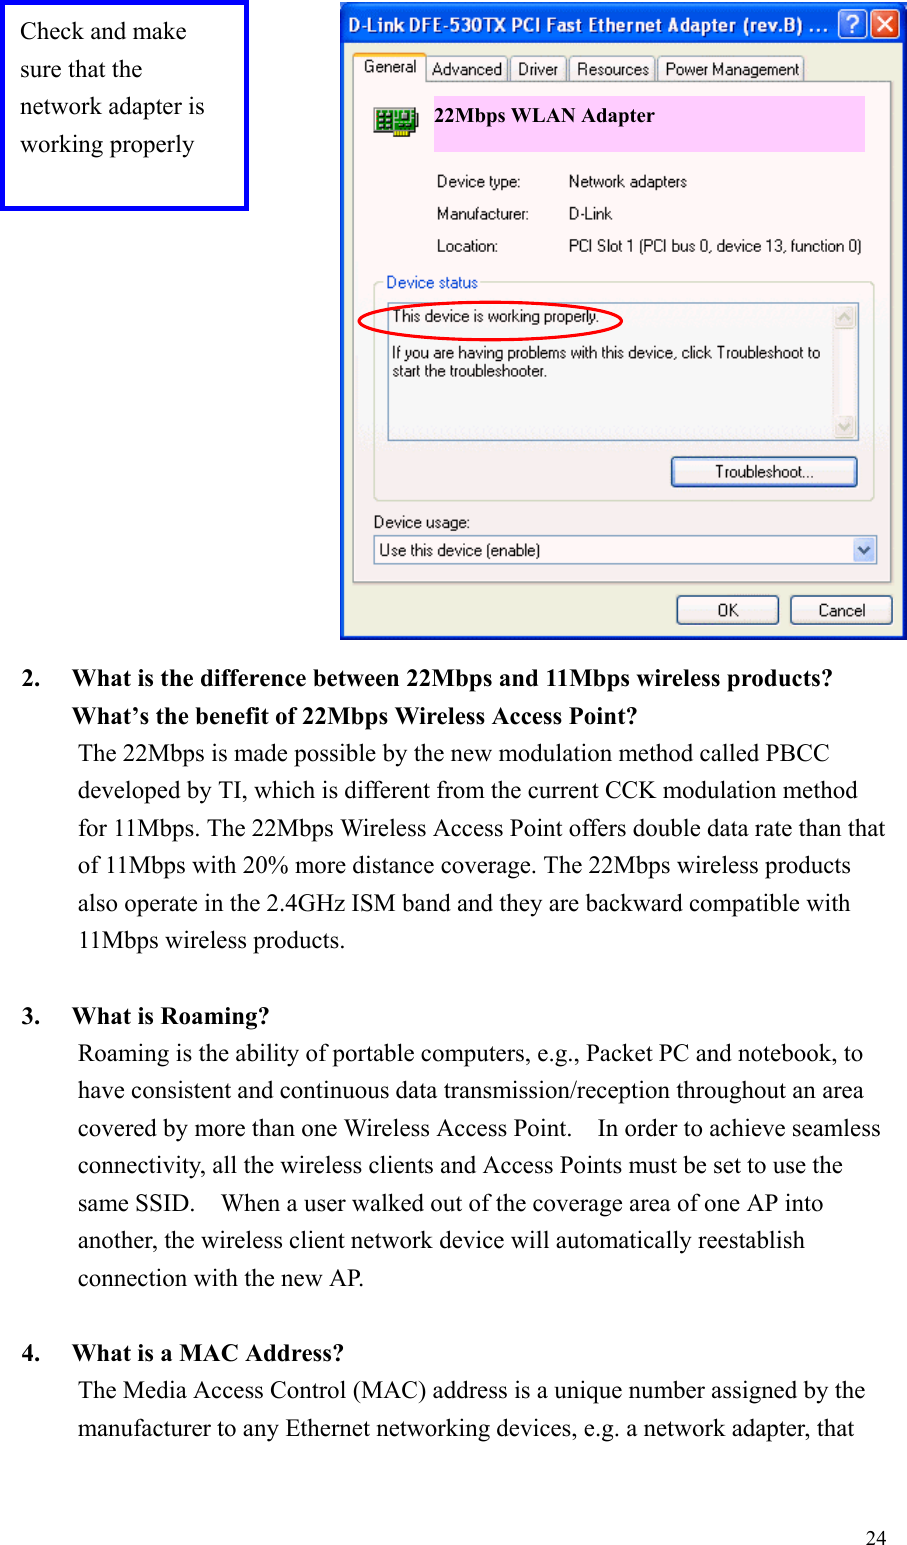 242. What is the difference between 22Mbps and 11Mbps wireless products?What’s the benefit of 22Mbps Wireless Access Point?The 22Mbps is made possible by the new modulation method called PBCCdeveloped by TI, which is different from the current CCK modulation methodfor 11Mbps. The 22Mbps Wireless Access Point offers double data rate than thatof 11Mbps with 20% more distance coverage. The 22Mbps wireless productsalso operate in the 2.4GHz ISM band and they are backward compatible with11Mbps wireless products.3. What is Roaming?Roaming is the ability of portable computers, e.g., Packet PC and notebook, tohave consistent and continuous data transmission/reception throughout an areacovered by more than one Wireless Access Point.    In order to achieve seamlessconnectivity, all the wireless clients and Access Points must be set to use thesame SSID.    When a user walked out of the coverage area of one AP intoanother, the wireless client network device will automatically reestablishconnection with the new AP.4. What is a MAC Address?The Media Access Control (MAC) address is a unique number assigned by themanufacturer to any Ethernet networking devices, e.g. a network adapter, thatCheck and makesure that thenetwork adapter isworking properly22Mbps WLAN Adapter